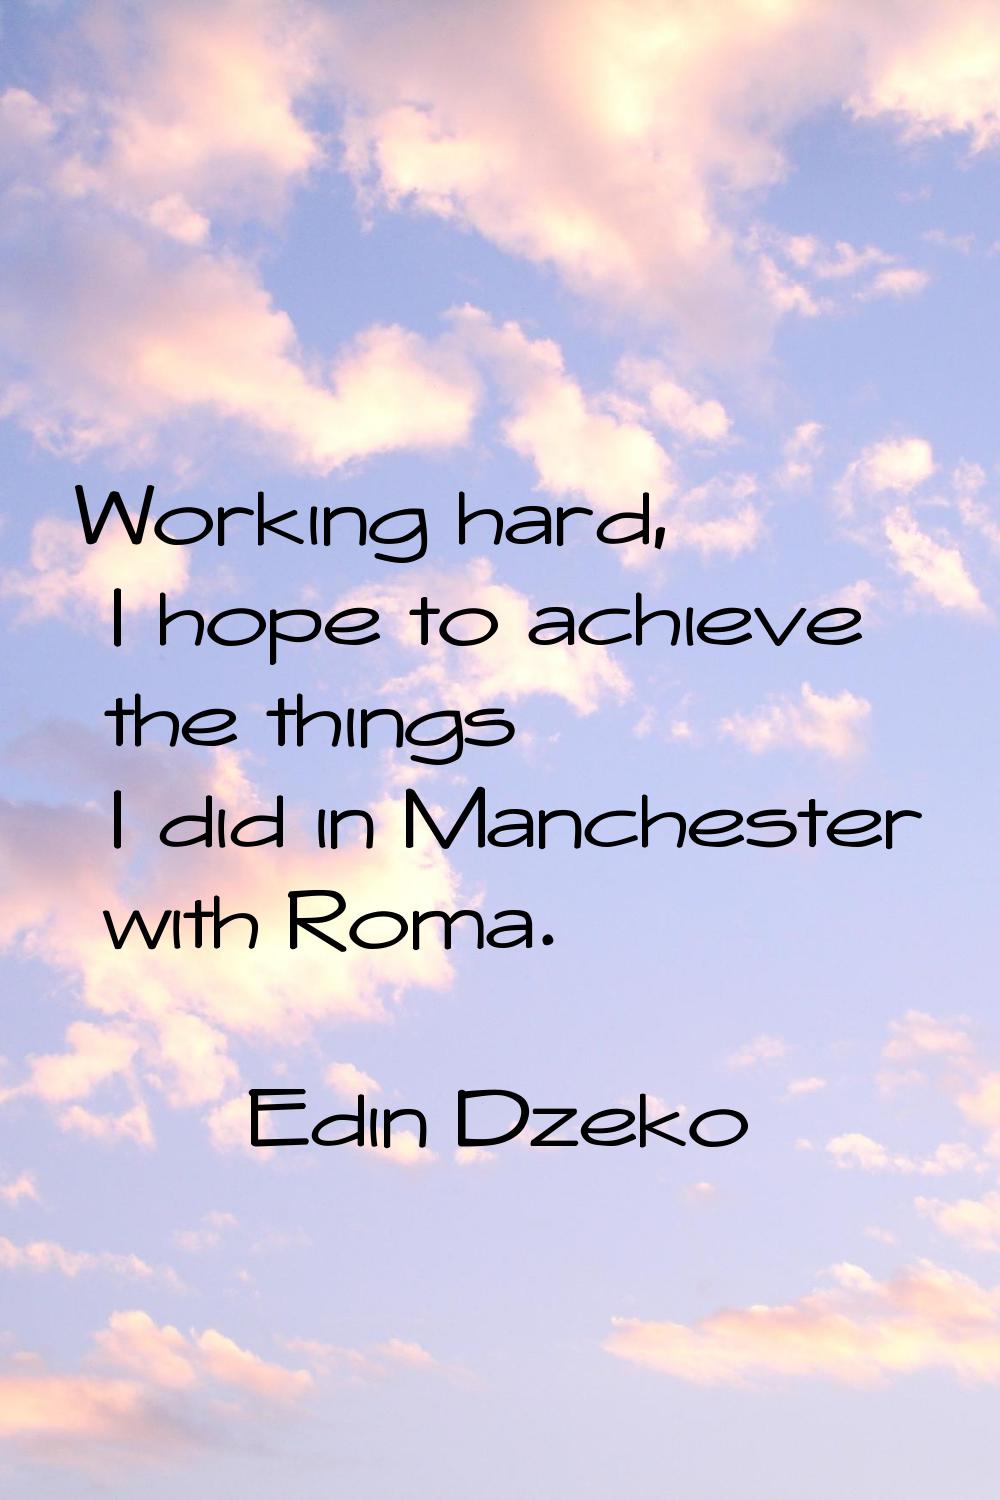 Working hard, I hope to achieve the things I did in Manchester with Roma.